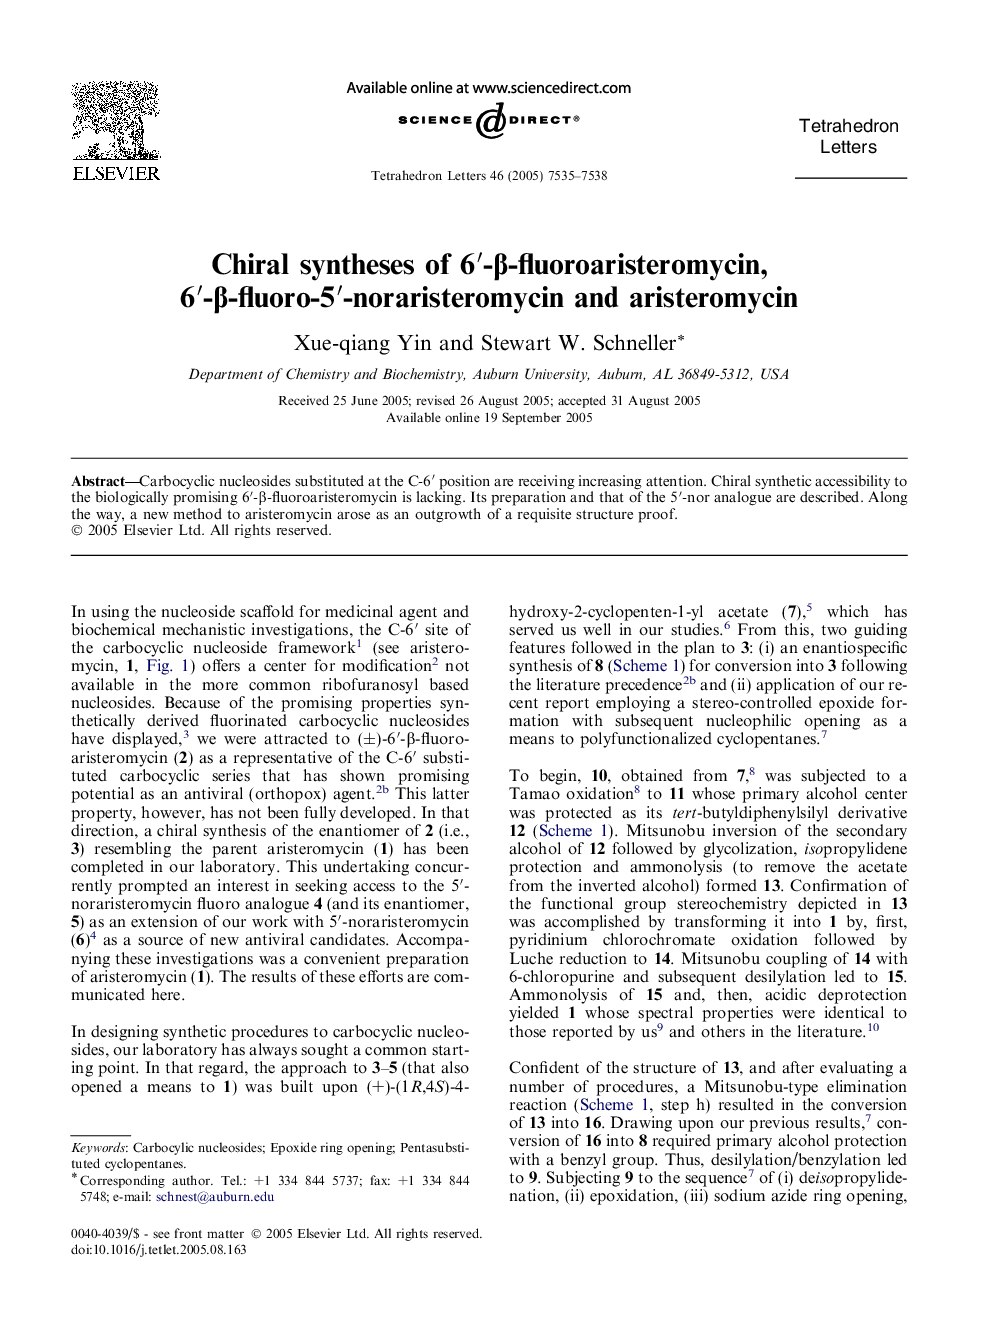 Chiral syntheses of 6â²-Î²-fluoroaristeromycin, 6â²-Î²-fluoro-5â²-noraristeromycin and aristeromycin